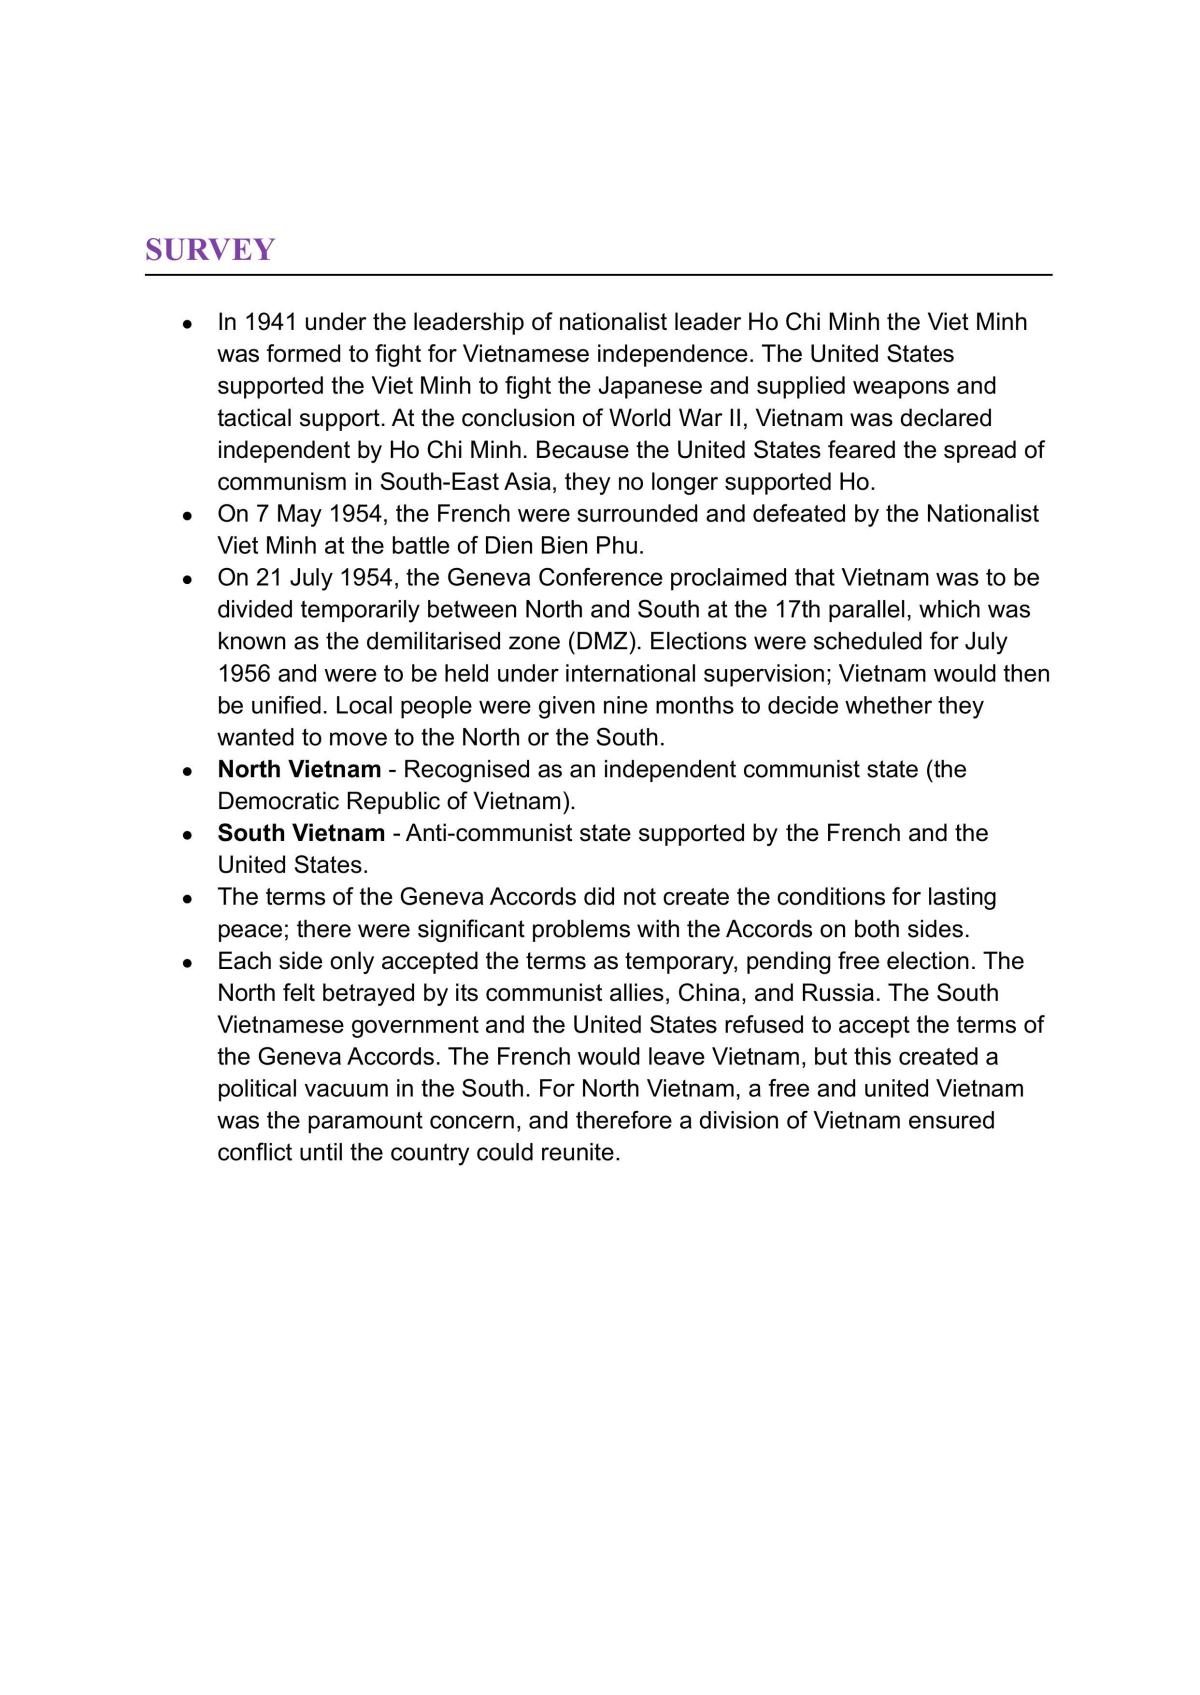 HSC - Conflict in Indochina Study Notes - Page 3